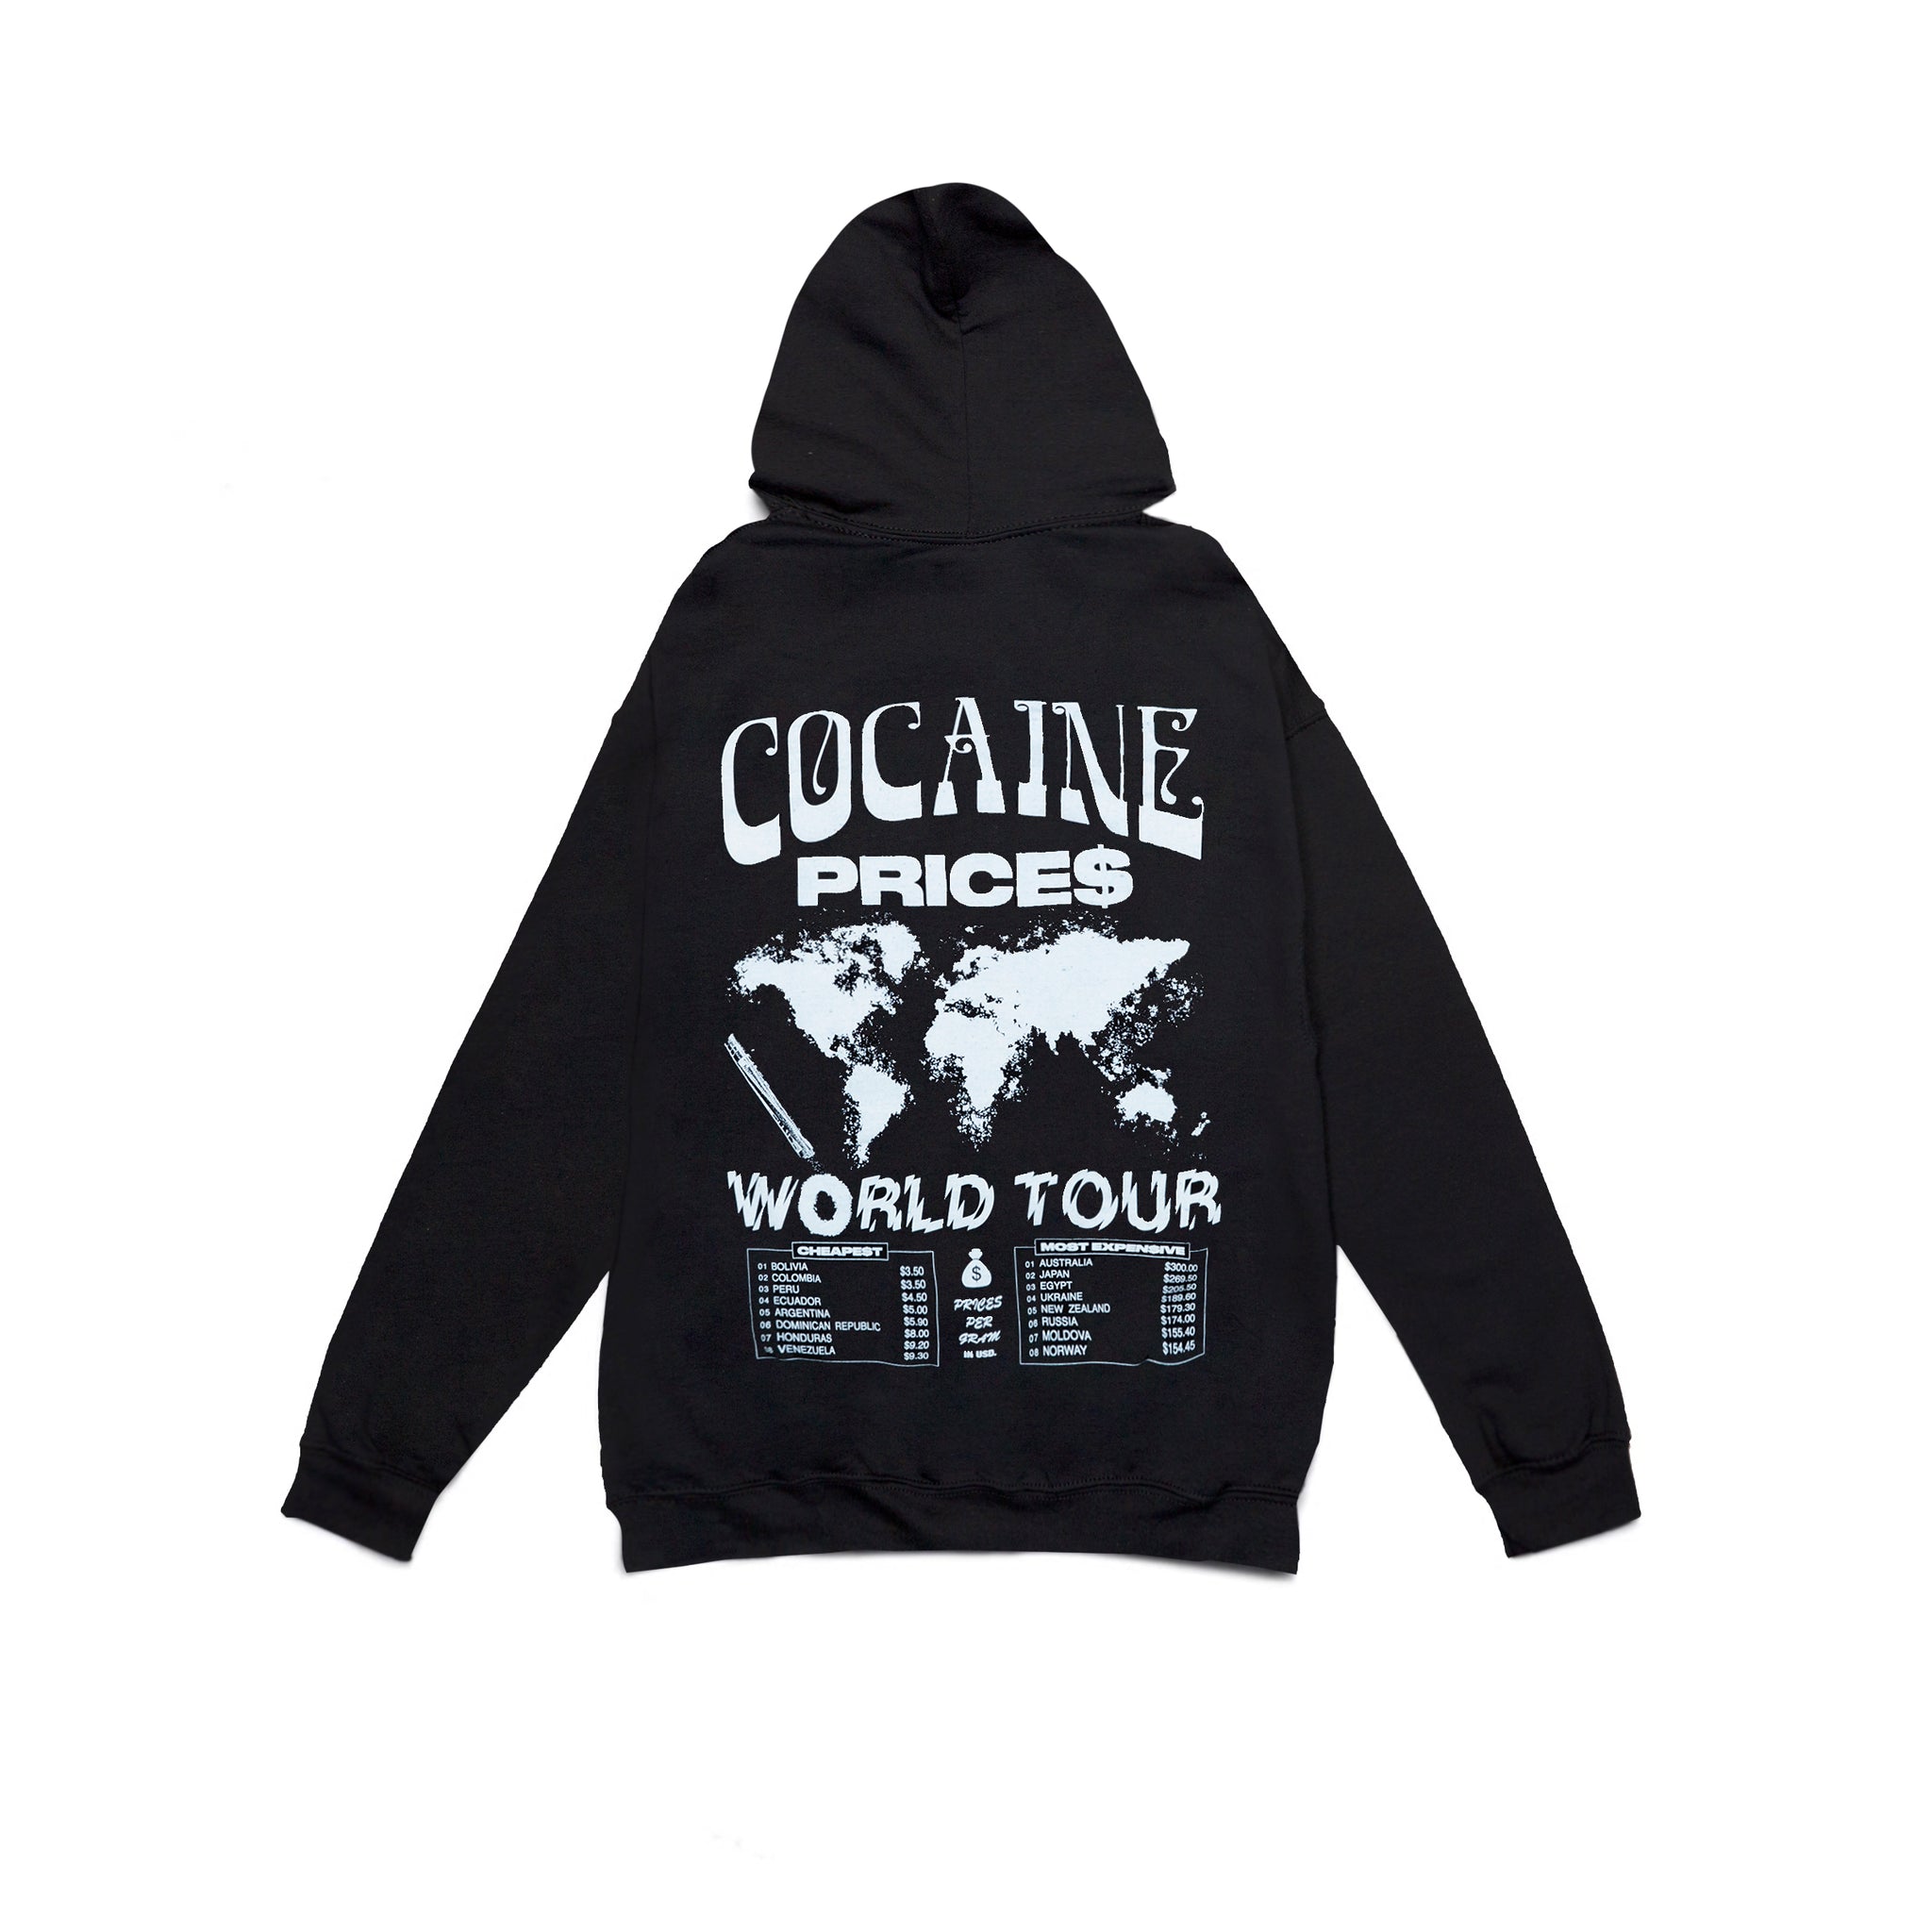 Back view of Made in Paradise World Drug Trade Collection "COCAINE PRICES" black hoodie